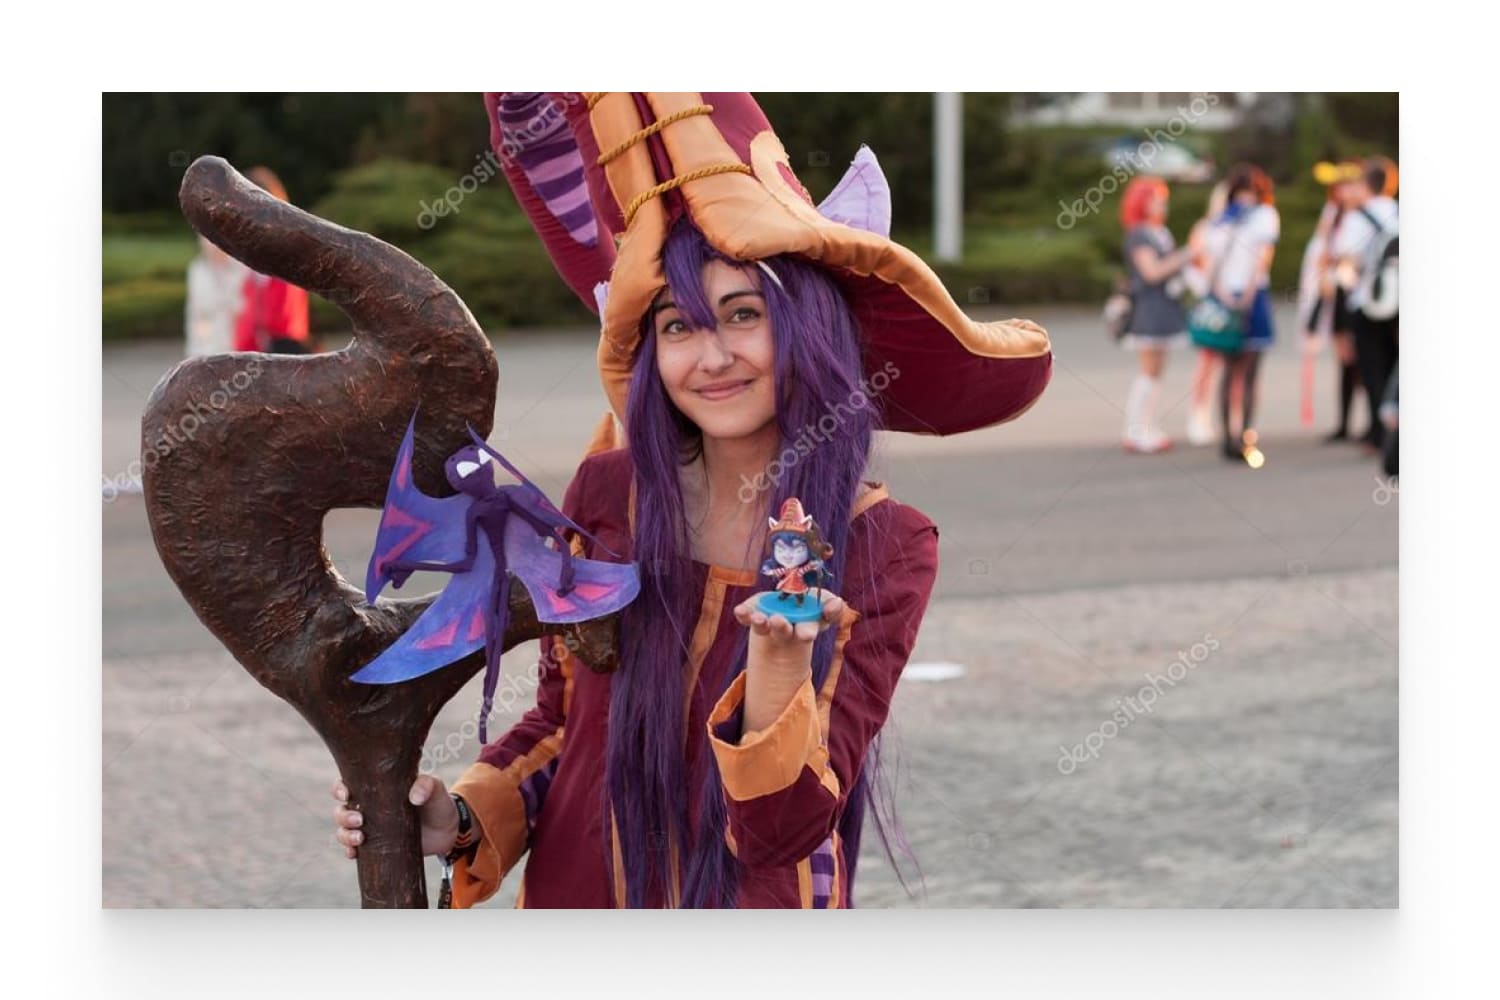 Cosplayer dressed as character Lulu from game League of Legends.